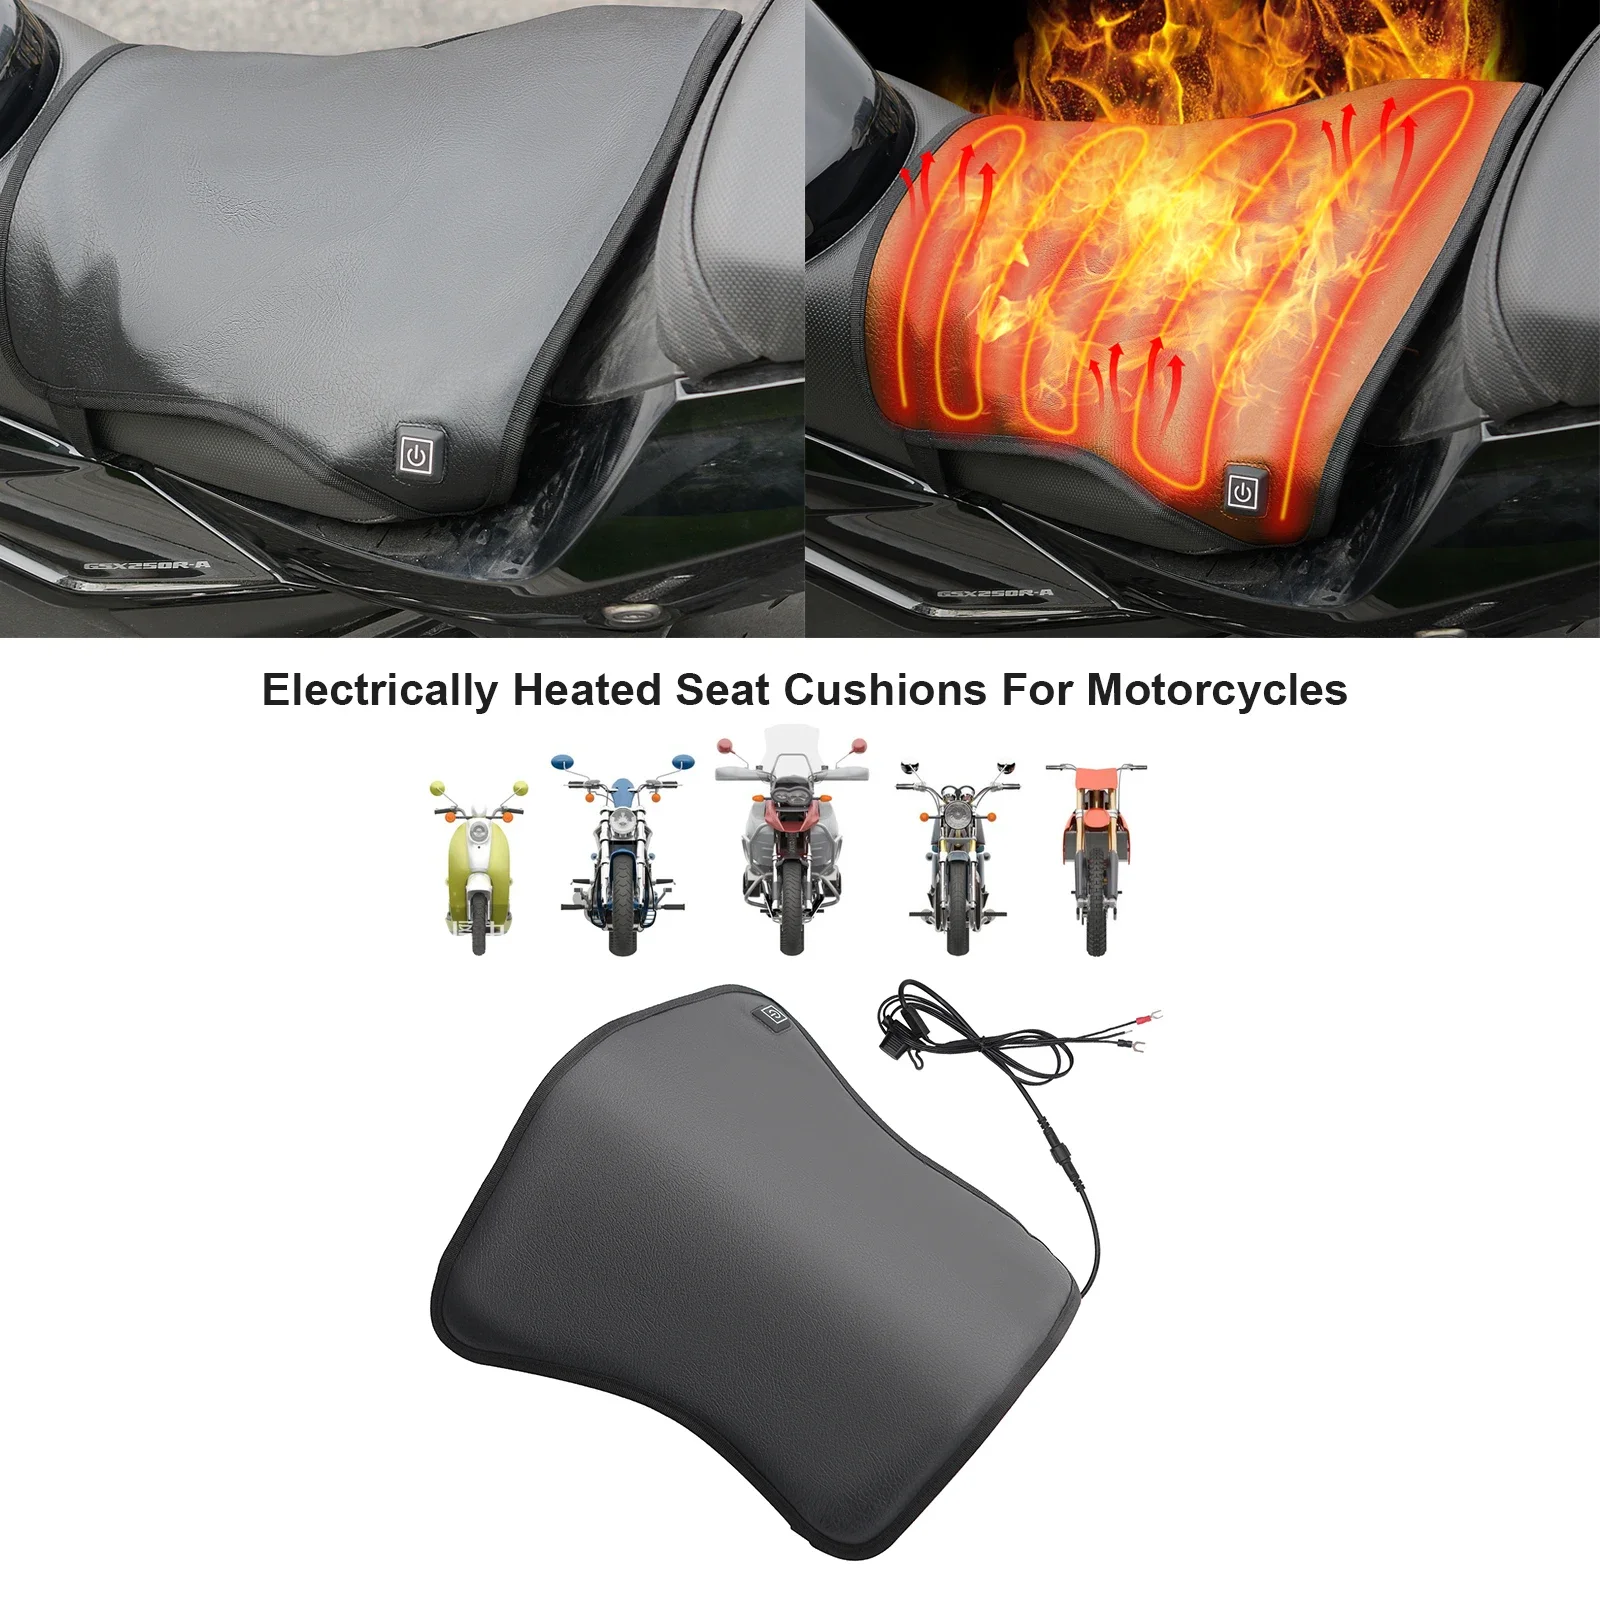 

12V Motorcycle Electric Heating Seat Cushion Three Speed Temperature Control Winter Warmer Riding Anti-slip Heating Seat Pads